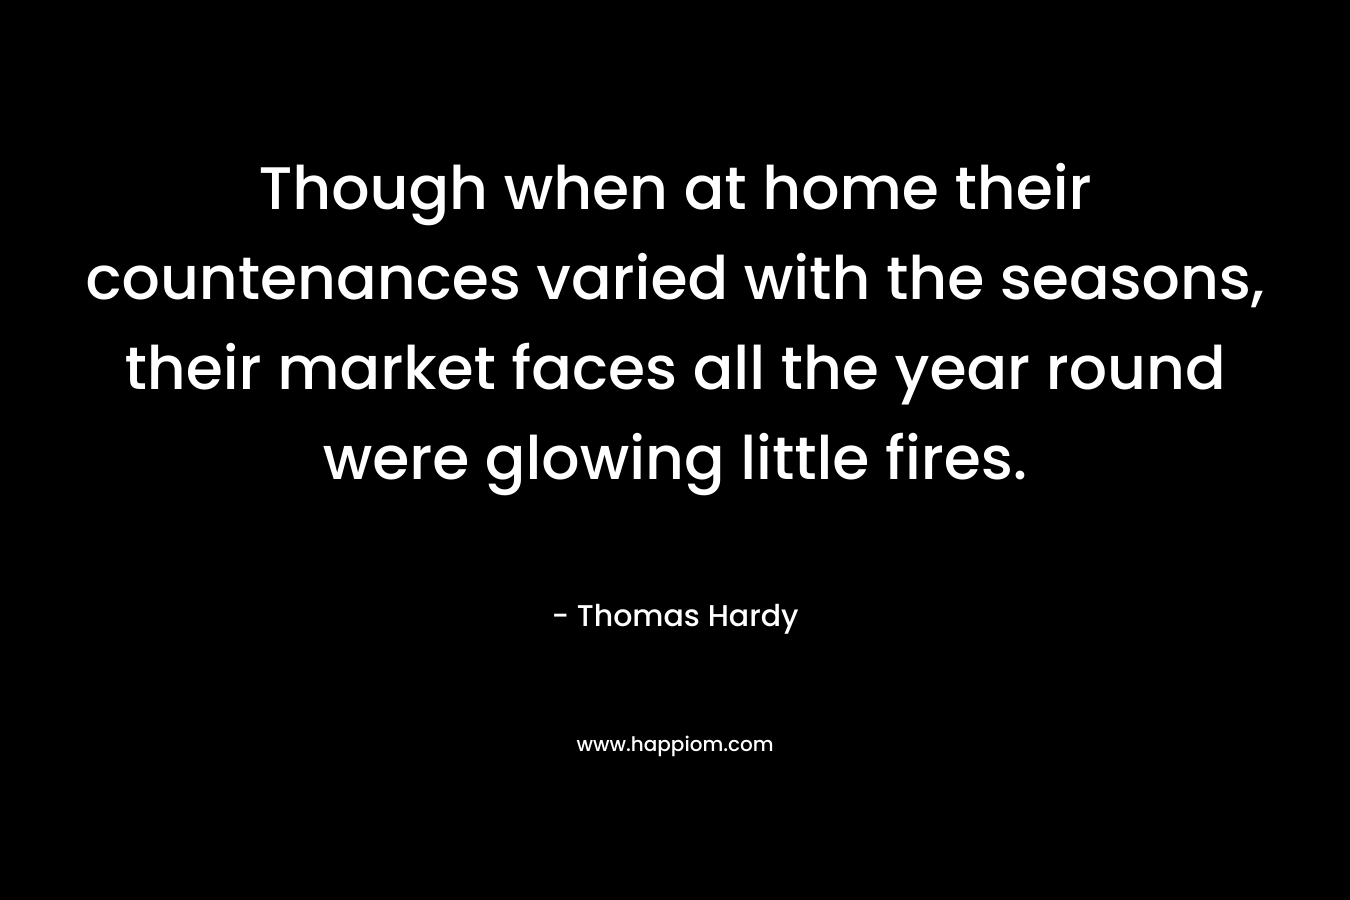 Though when at home their countenances varied with the seasons, their market faces all the year round were glowing little fires. – Thomas Hardy